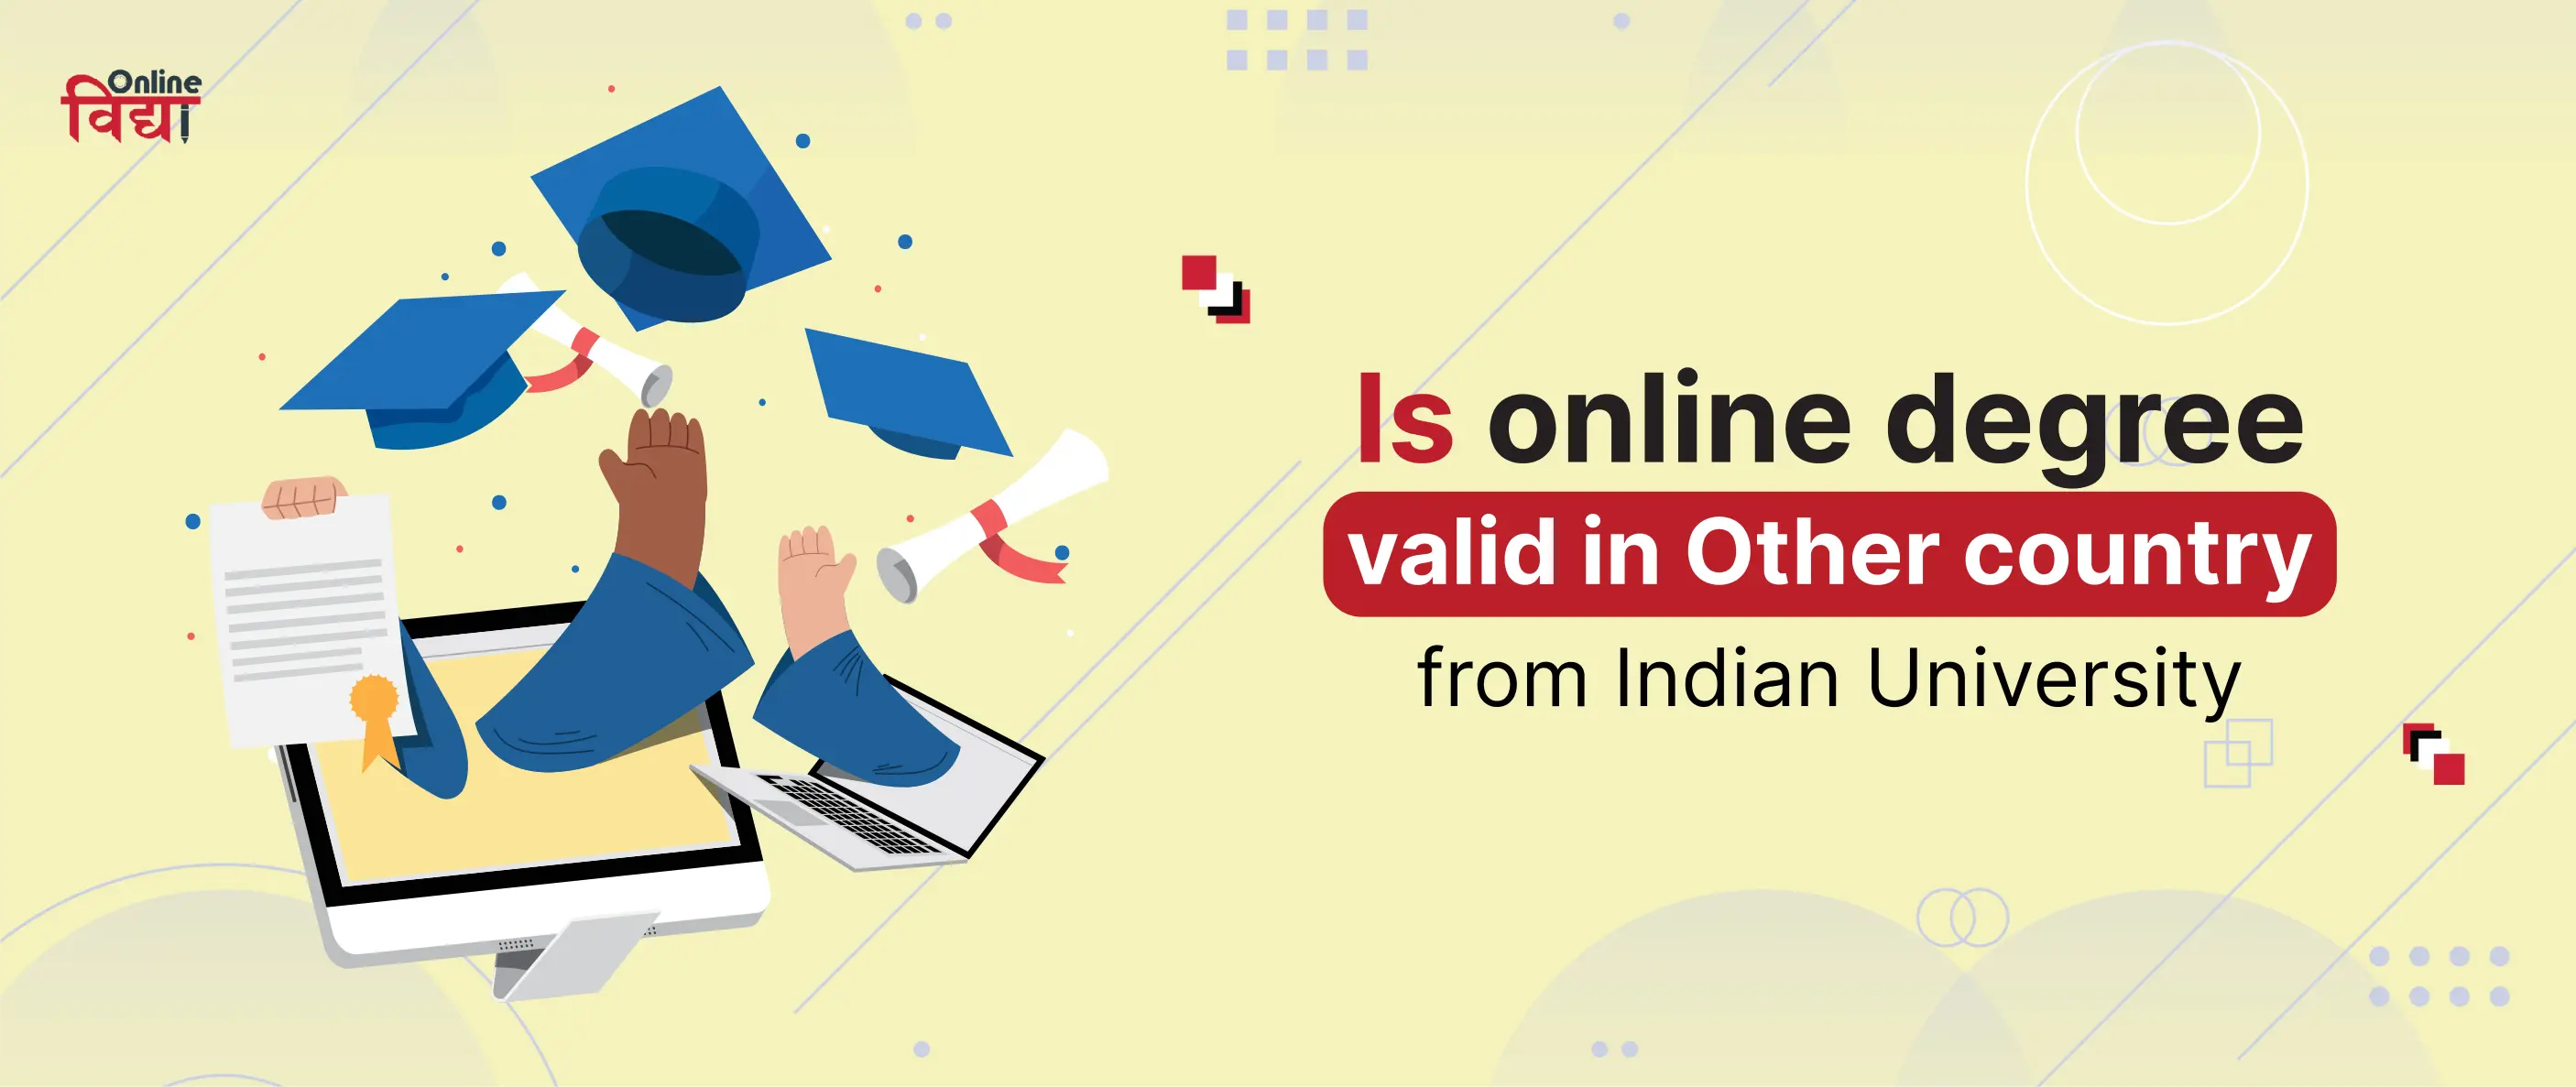 Is an online degree valid in another country from an Indian University?